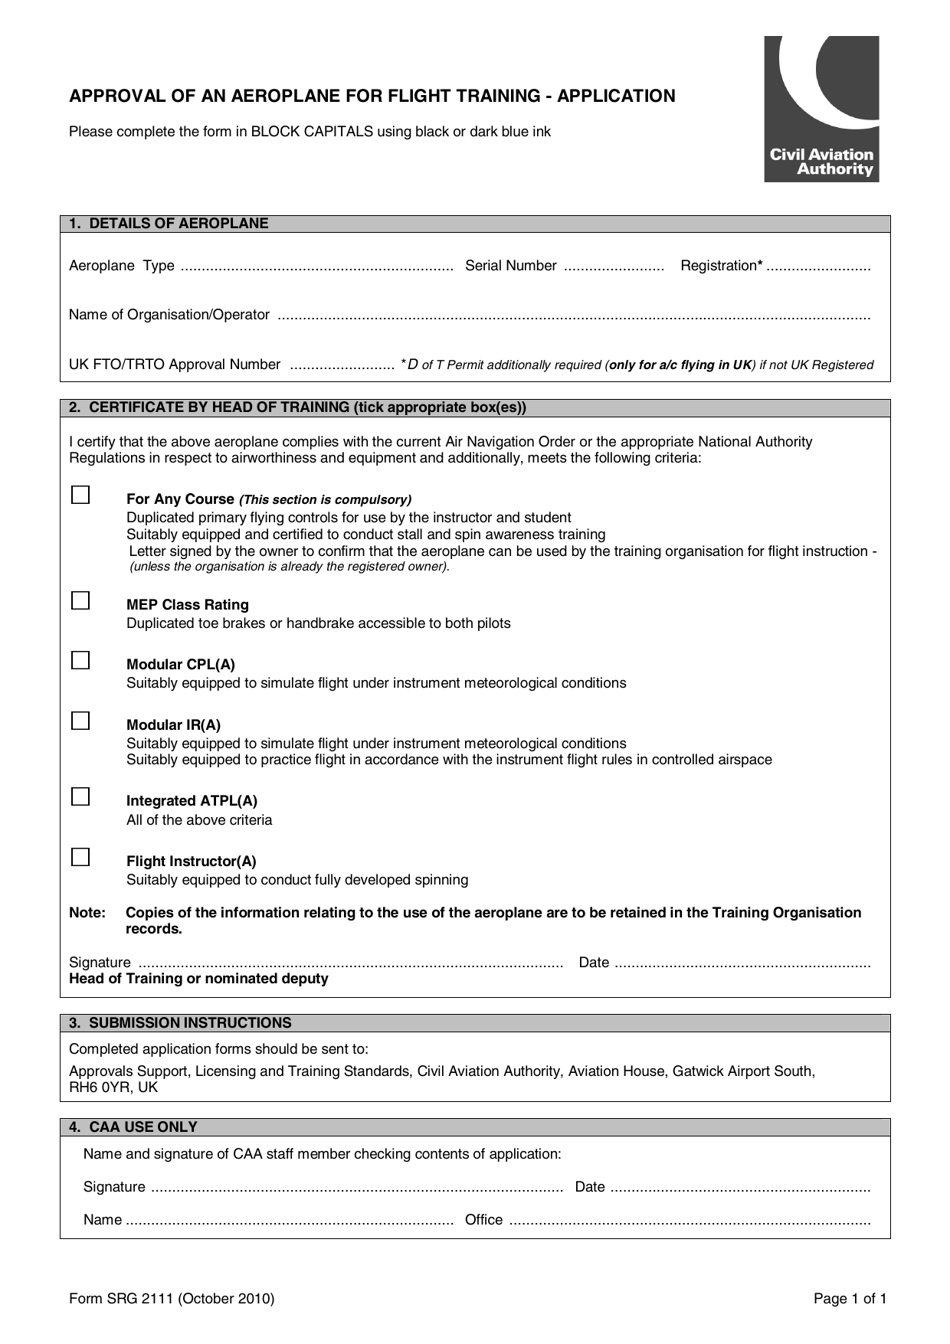 Form SRG2111 Approval of an Aeroplane for Flight Training - Application - United Kingdom, Page 1